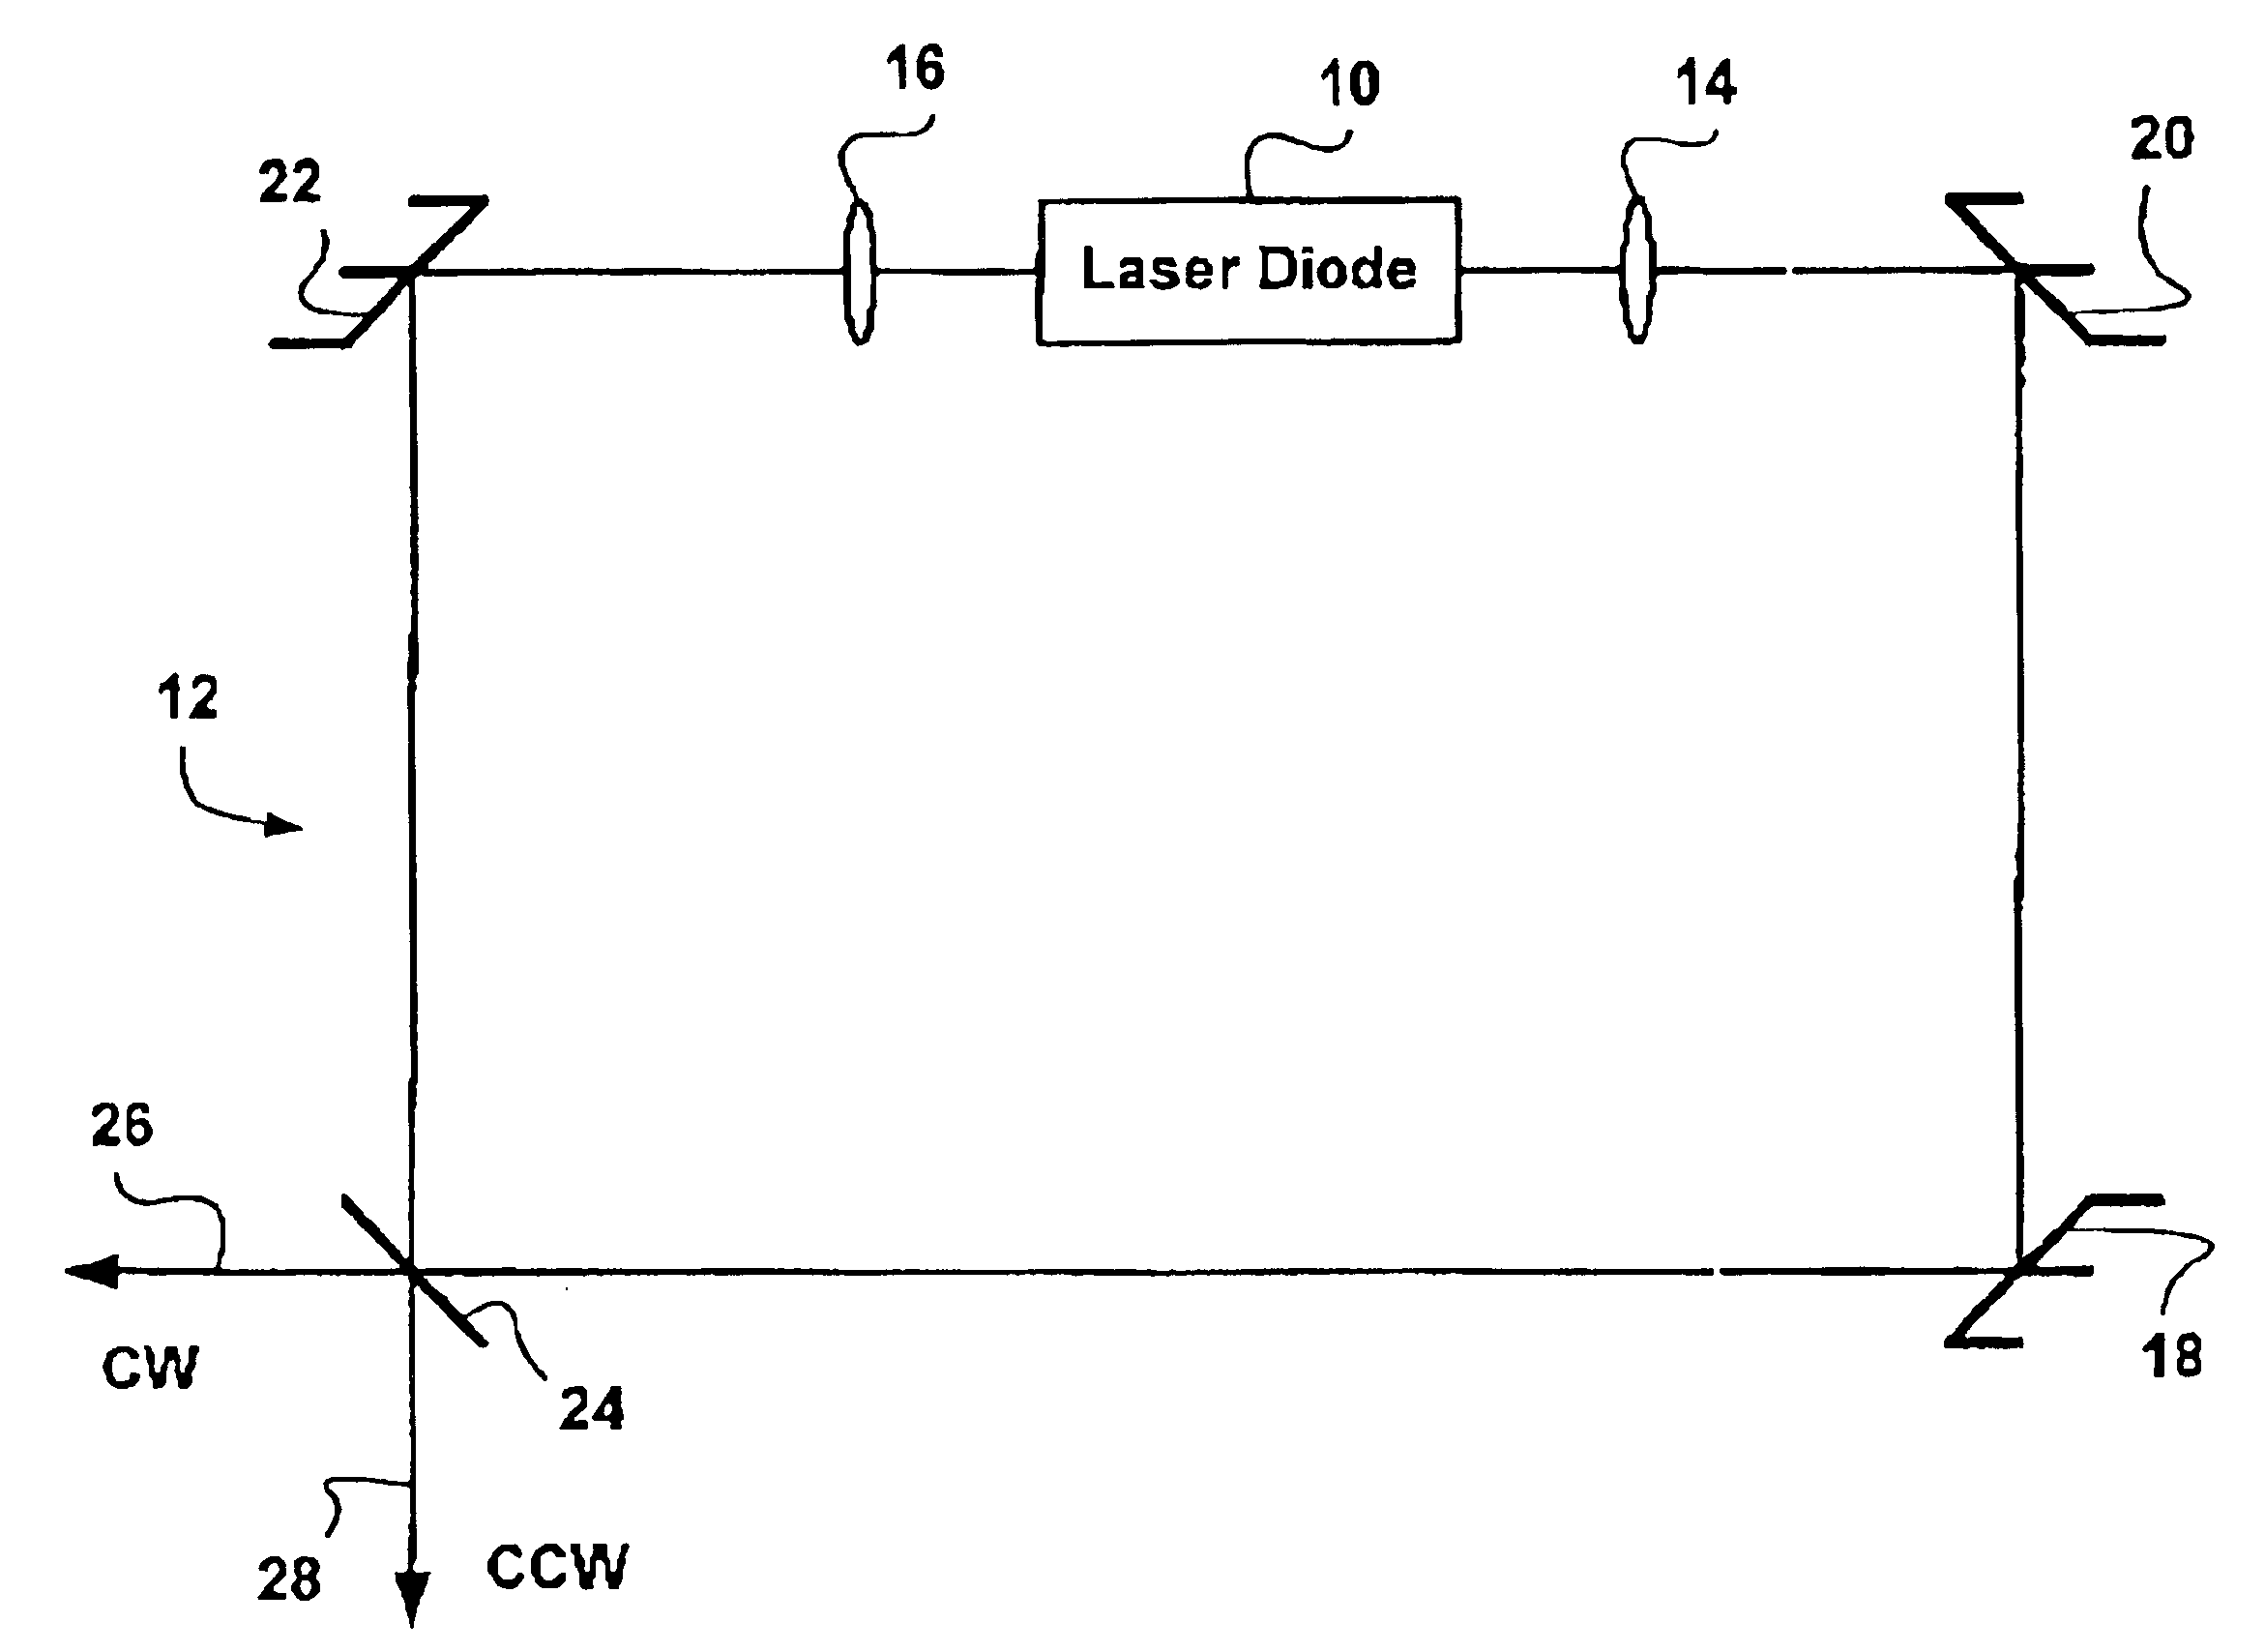 Dual-wavelength passive self-modulated mode-locked semiconductor laser diode